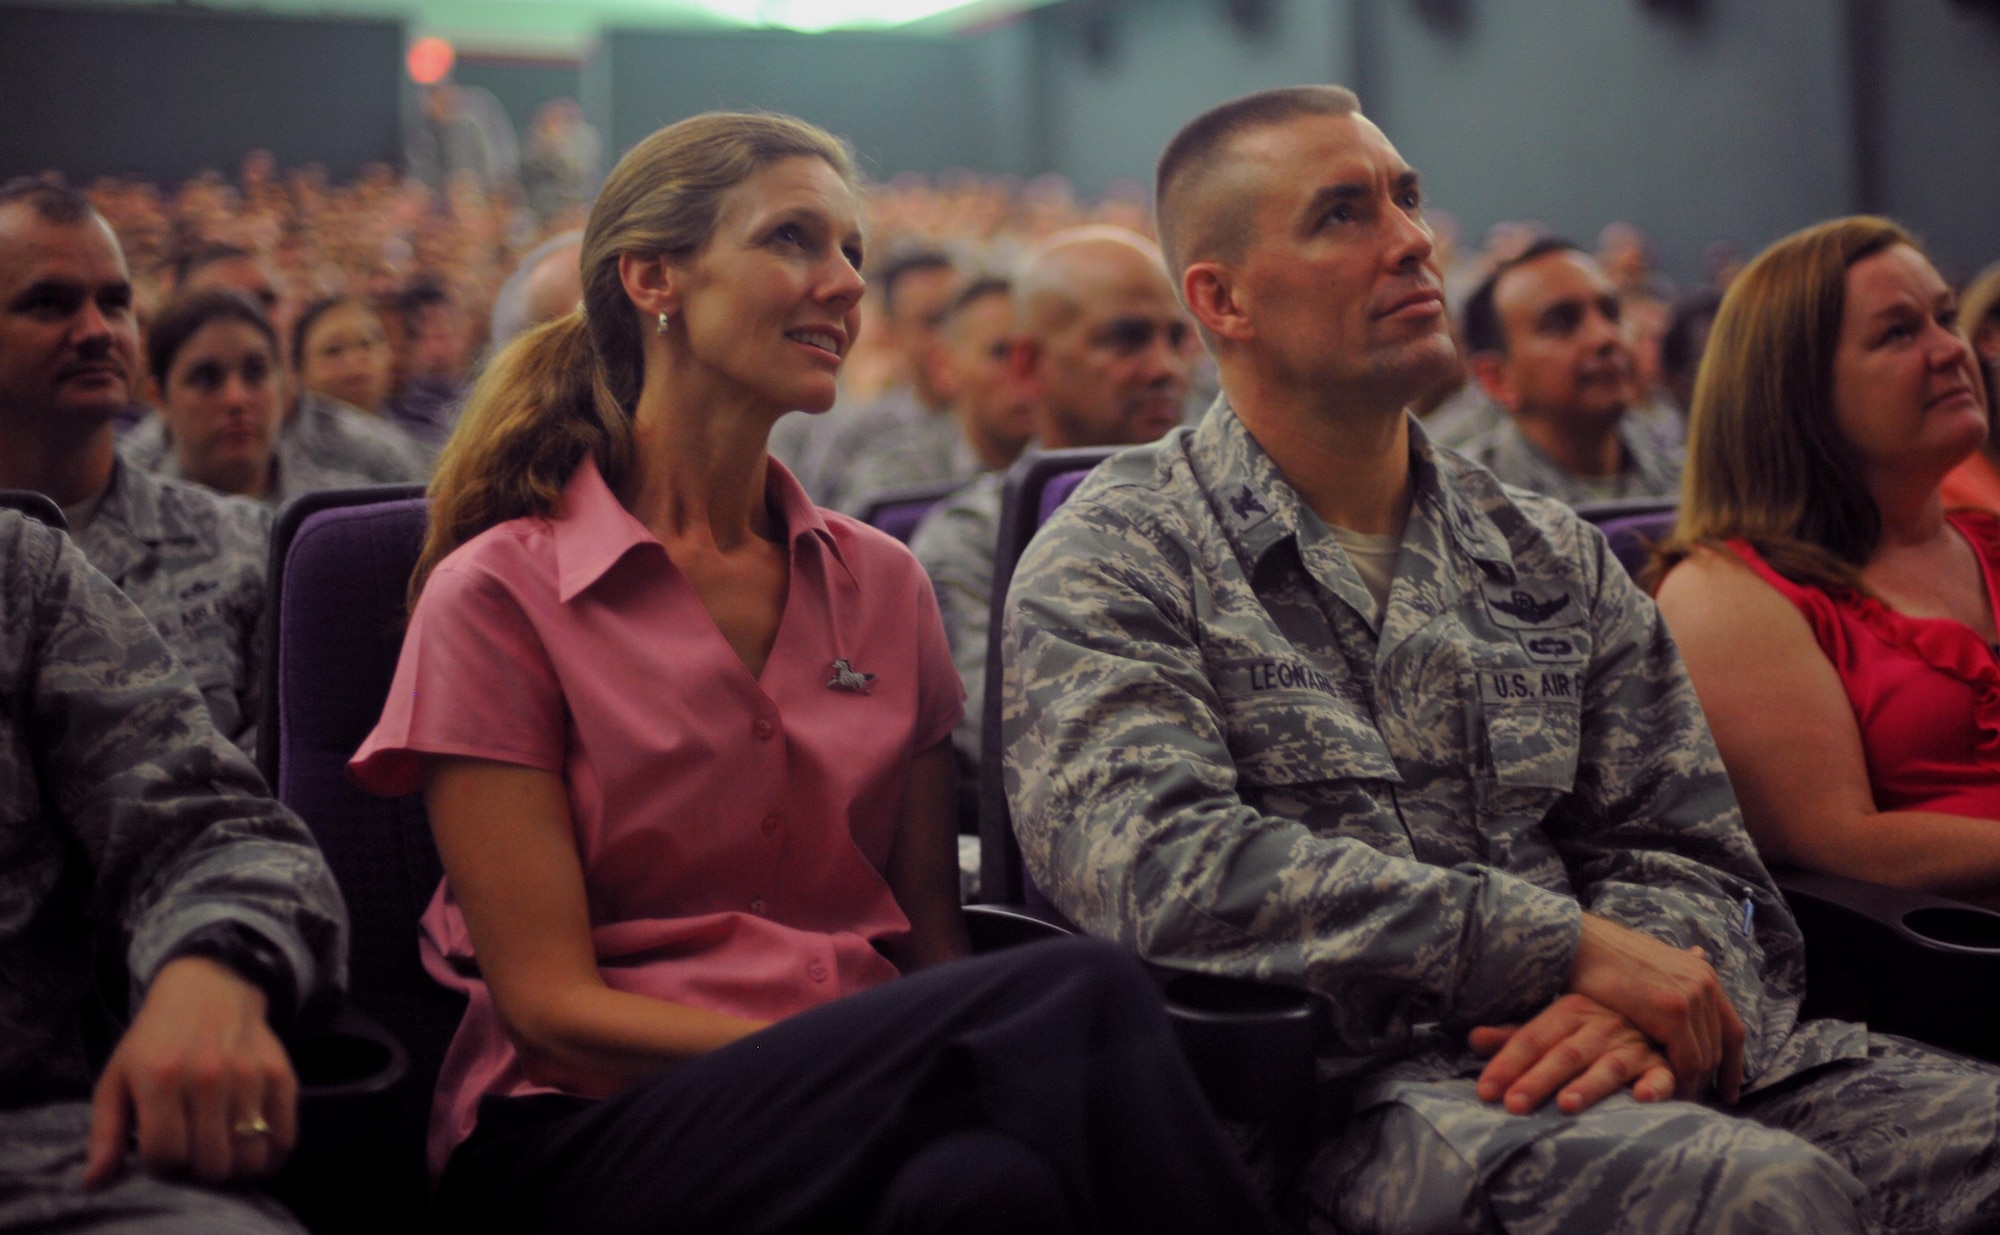 Col. Brook Leonard (right) and his wife Maria, listen to Air Force Chief of Staff Gen. Mark A. Welsh III and Chief Master Sgt. of the Air Force James A. Cody speak during an Airman’s call Aug. 22, 2013 at Osan Air Base, South Korea. Welsh and Cody thanked Airmen for their continued service and dedication, and issued their three keys to success: common sense, communication and caring. Leonard is the 51st Fighter Wing commander.